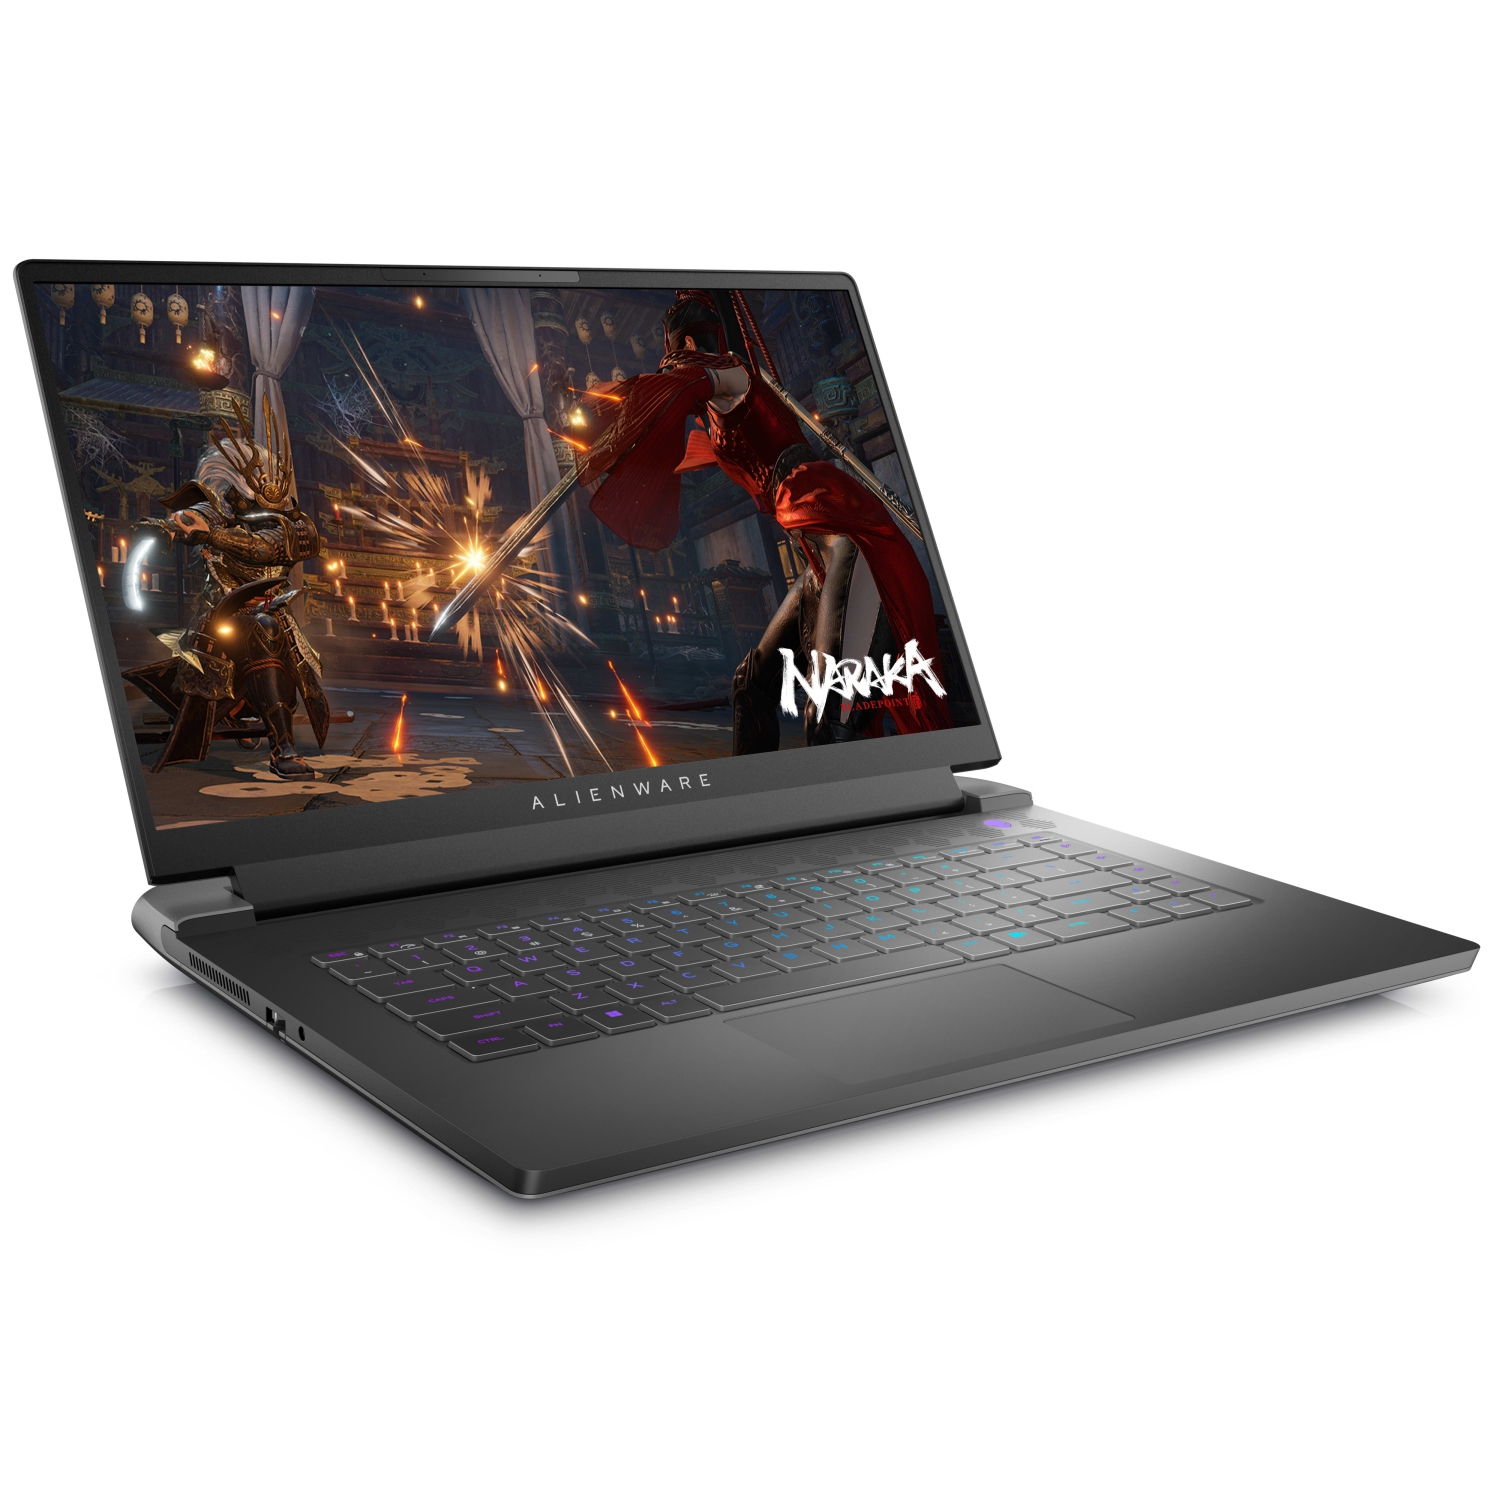 Refurbished (Excellent) – Dell Alienware m15 R7 Gaming Laptop (2022) | 15.6" QHD | Core i9 - 512GB SSD - 16GB RAM - RTX 3080 | 14 Cores @ 5 GHz - 12th Gen CPU - 8GB GDDR6X